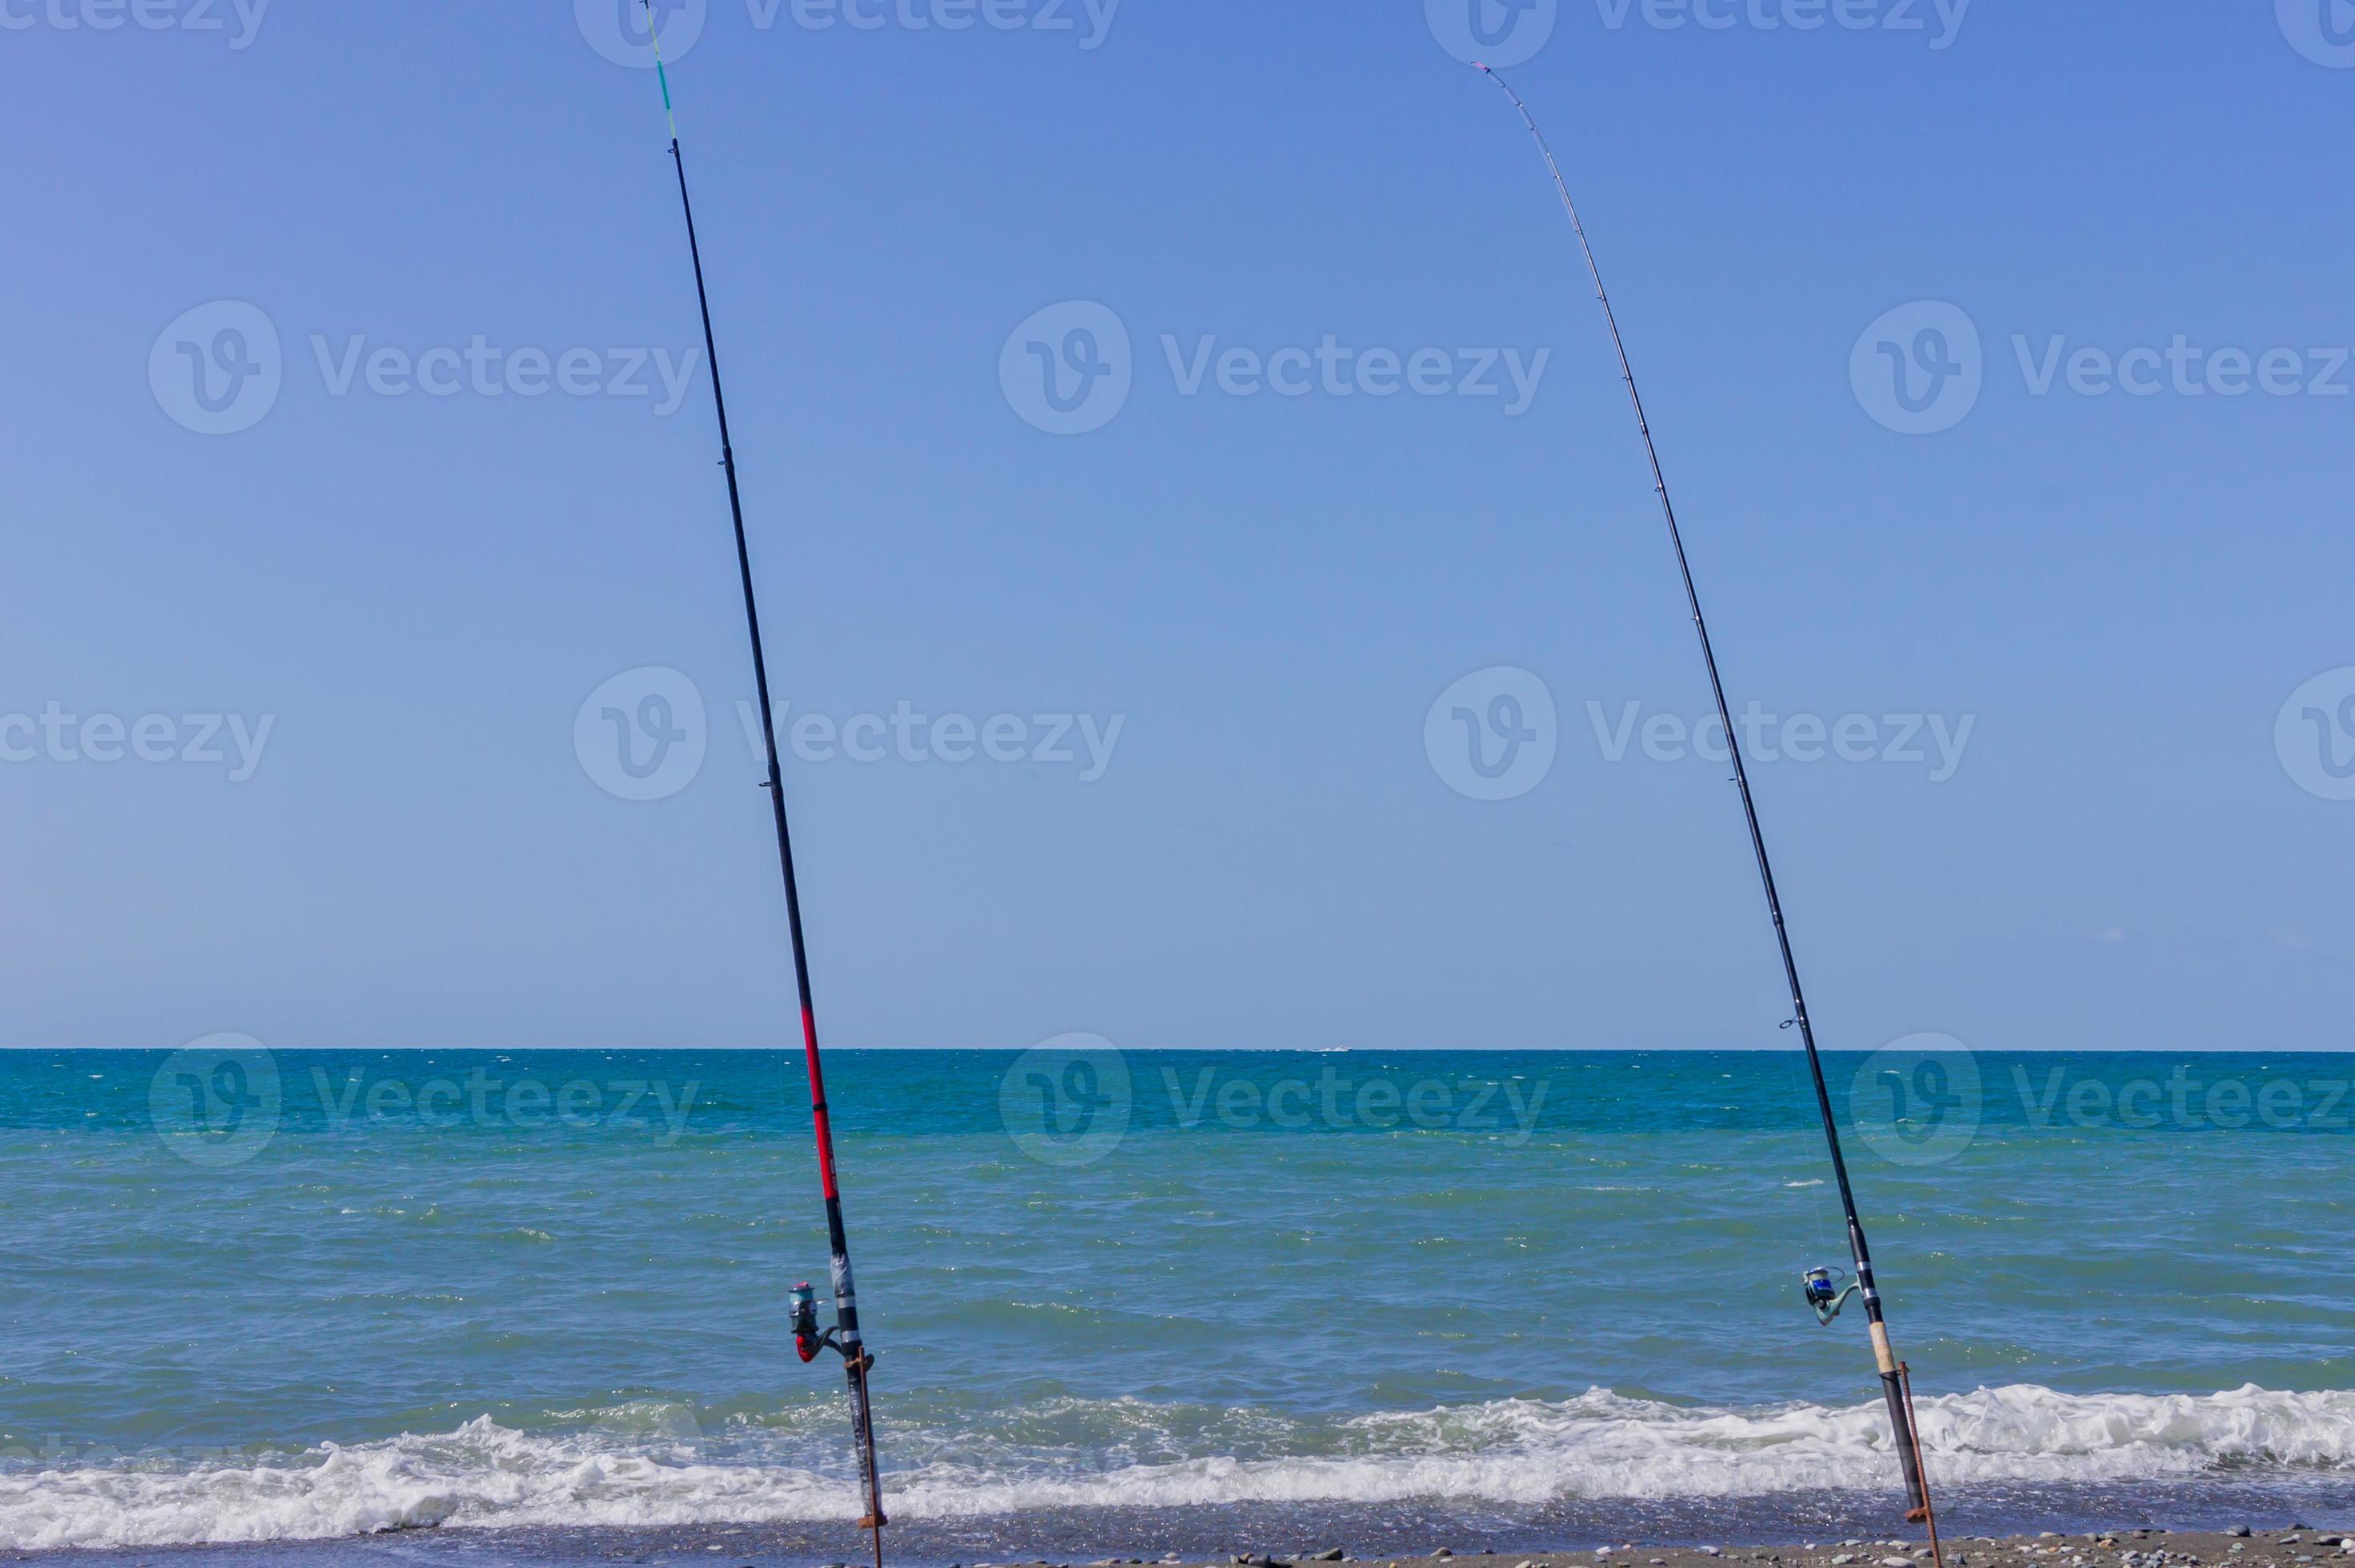 https://static.vecteezy.com/system/resources/previews/011/033/927/large_2x/two-fishing-rods-on-sea-beach-fishing-tourism-and-vacation-concept-photo.jpg